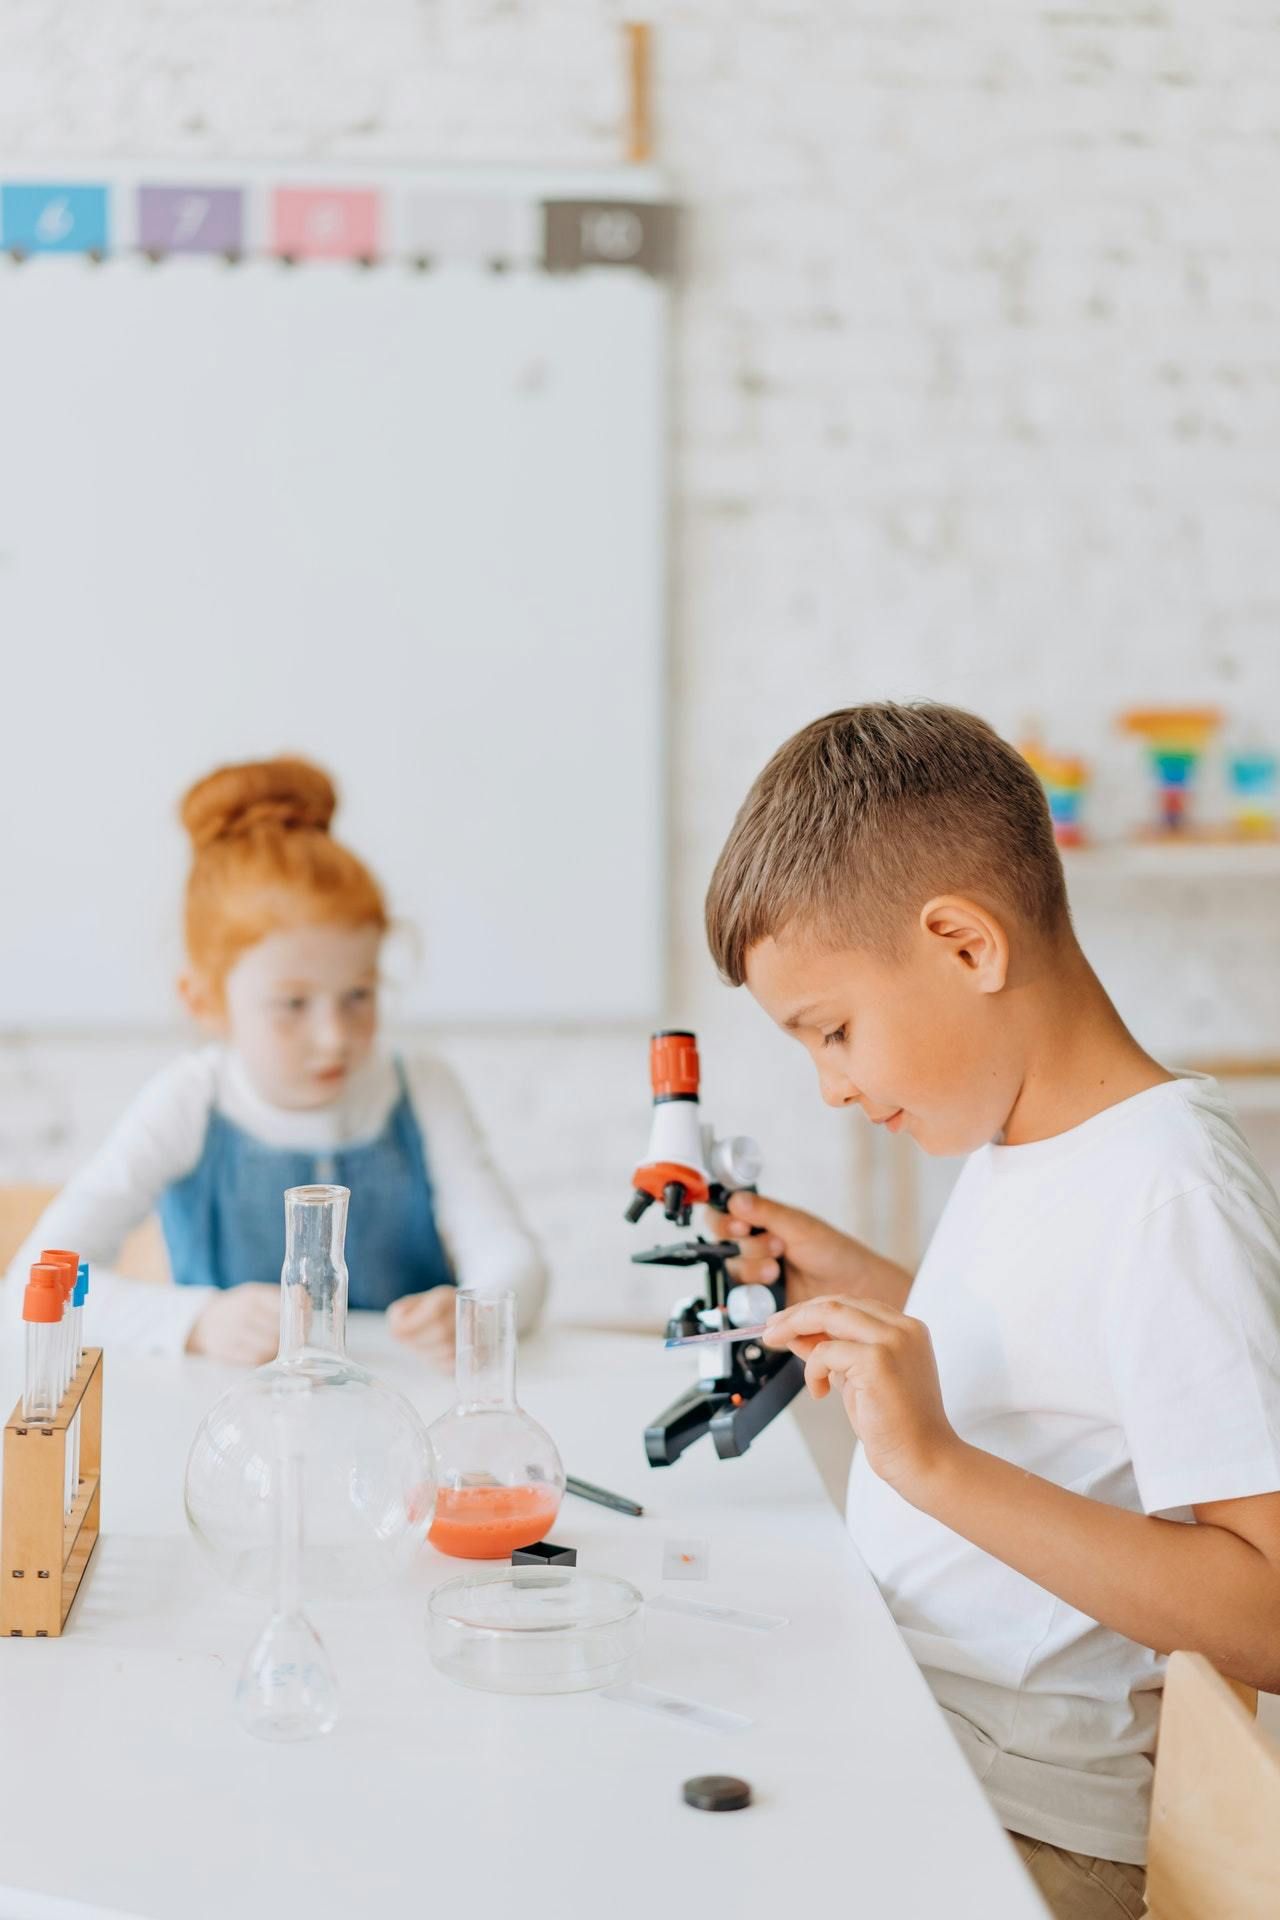 Children with microscope studying science at school